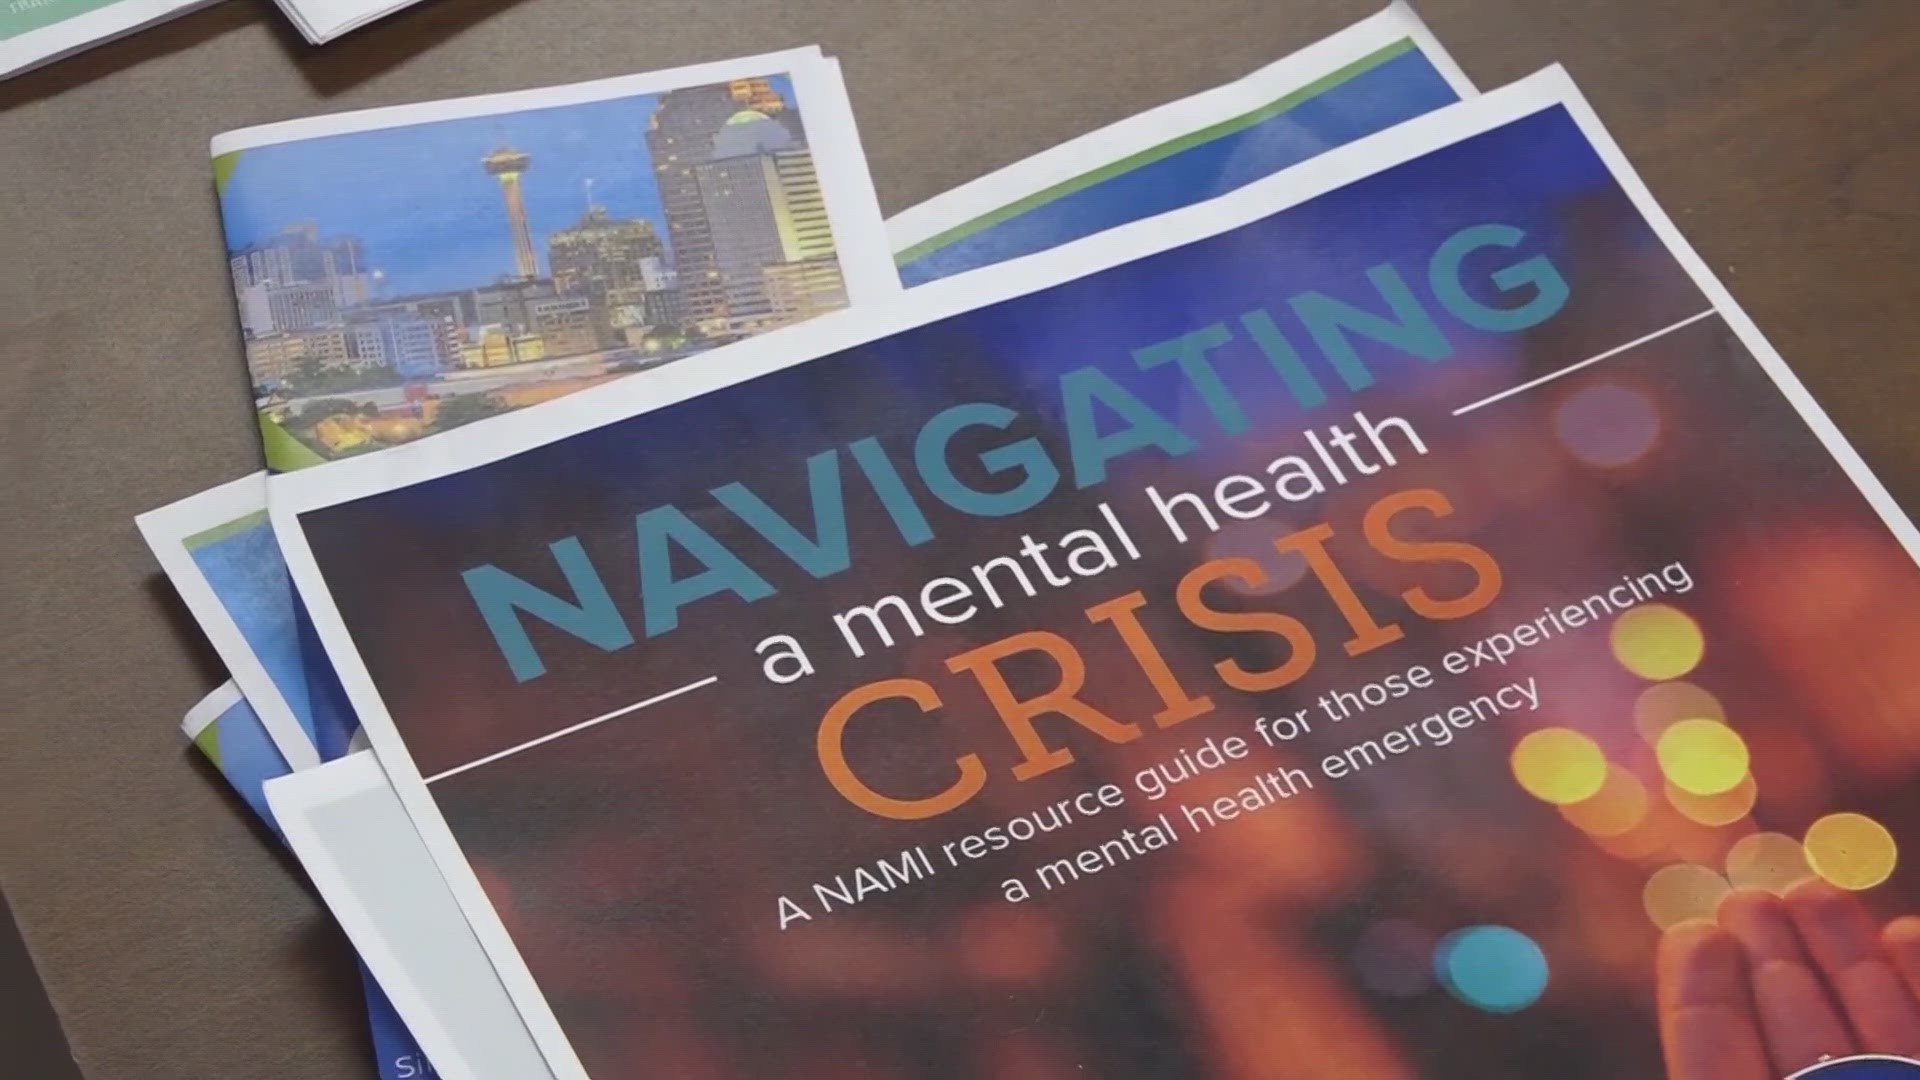 "The journey, it is still ongoing," said San Antonio native Maverick Crawford, who found help through the National Alliance on Mental Illness, or NAMI.